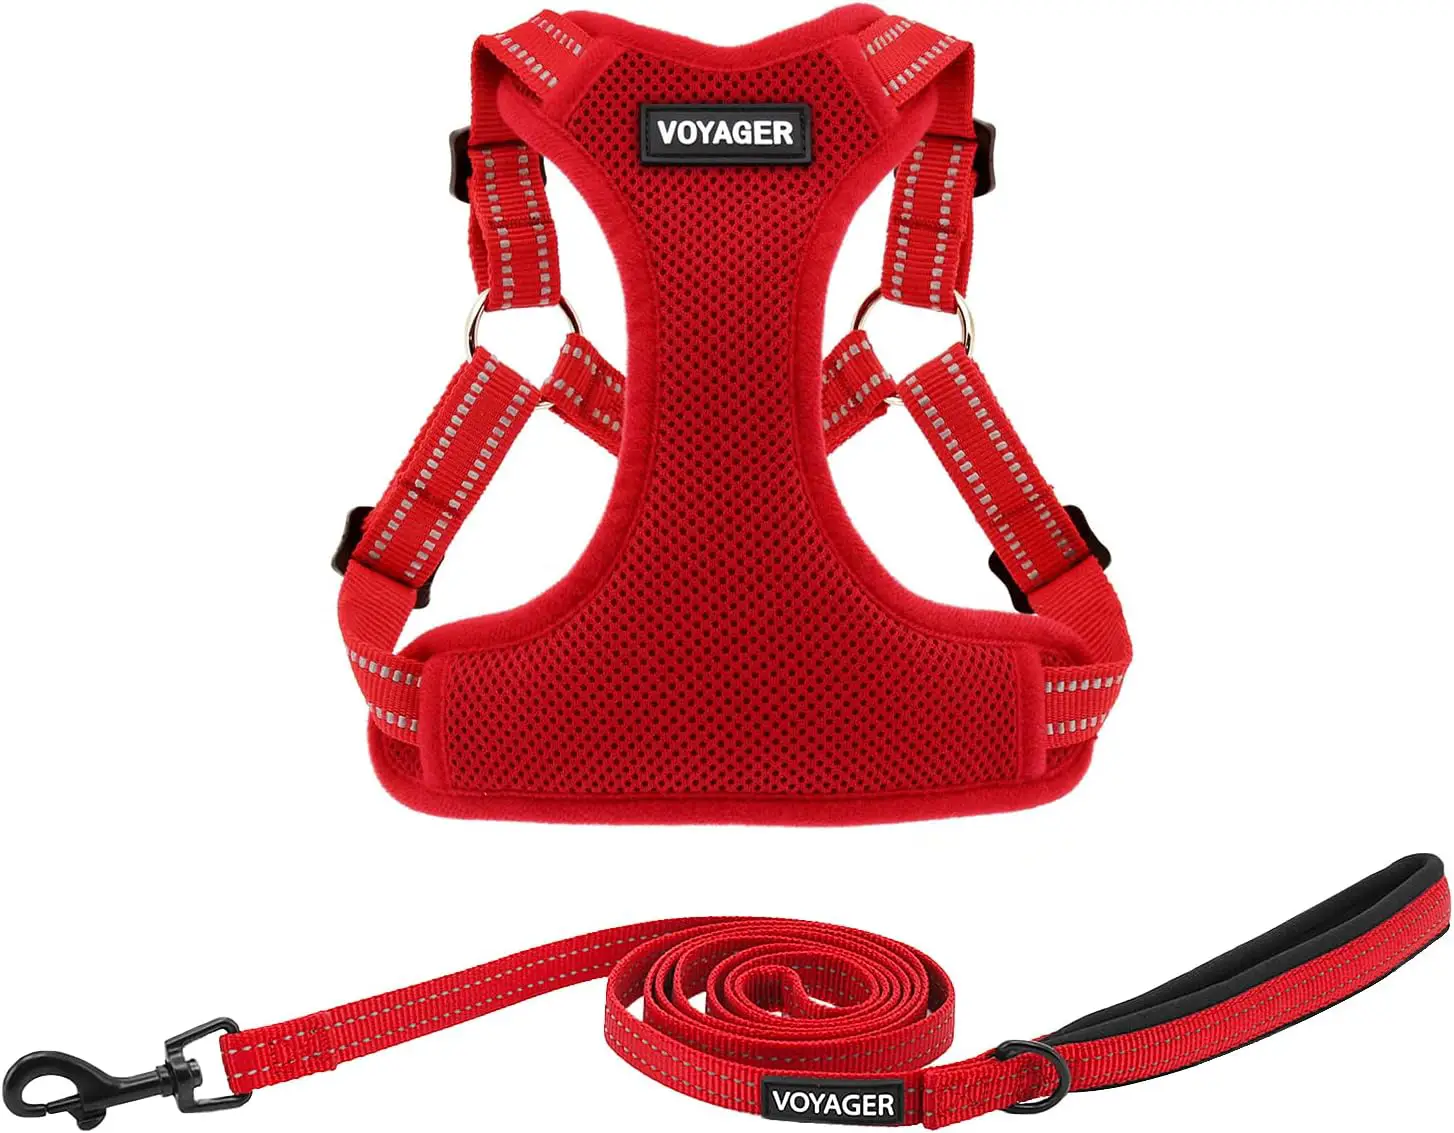 Best Pet Supplies Voyager Adjustable Dog Harness Leash Set with Reflective Stripes for Walking Heavy-Duty Full Body No Pull Vest with Leash D-Ring, Breathable All-Weather - Harness (Red), S